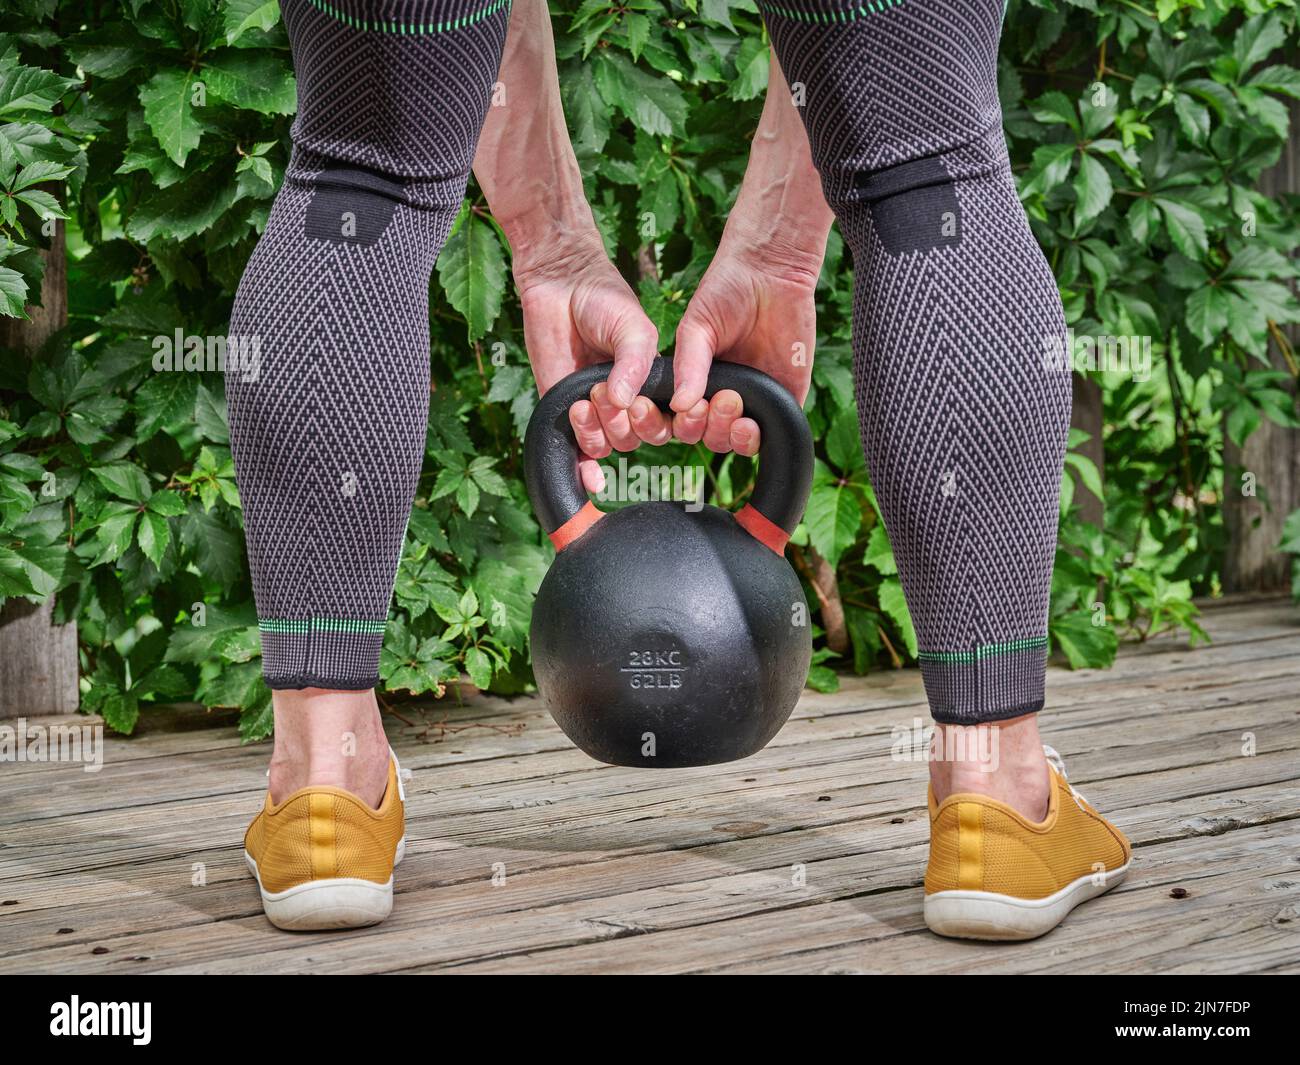 male wearing compression knee and calf braces is exercising with a heavy iron kettlebell on a backyard wooden deck Stock Photo